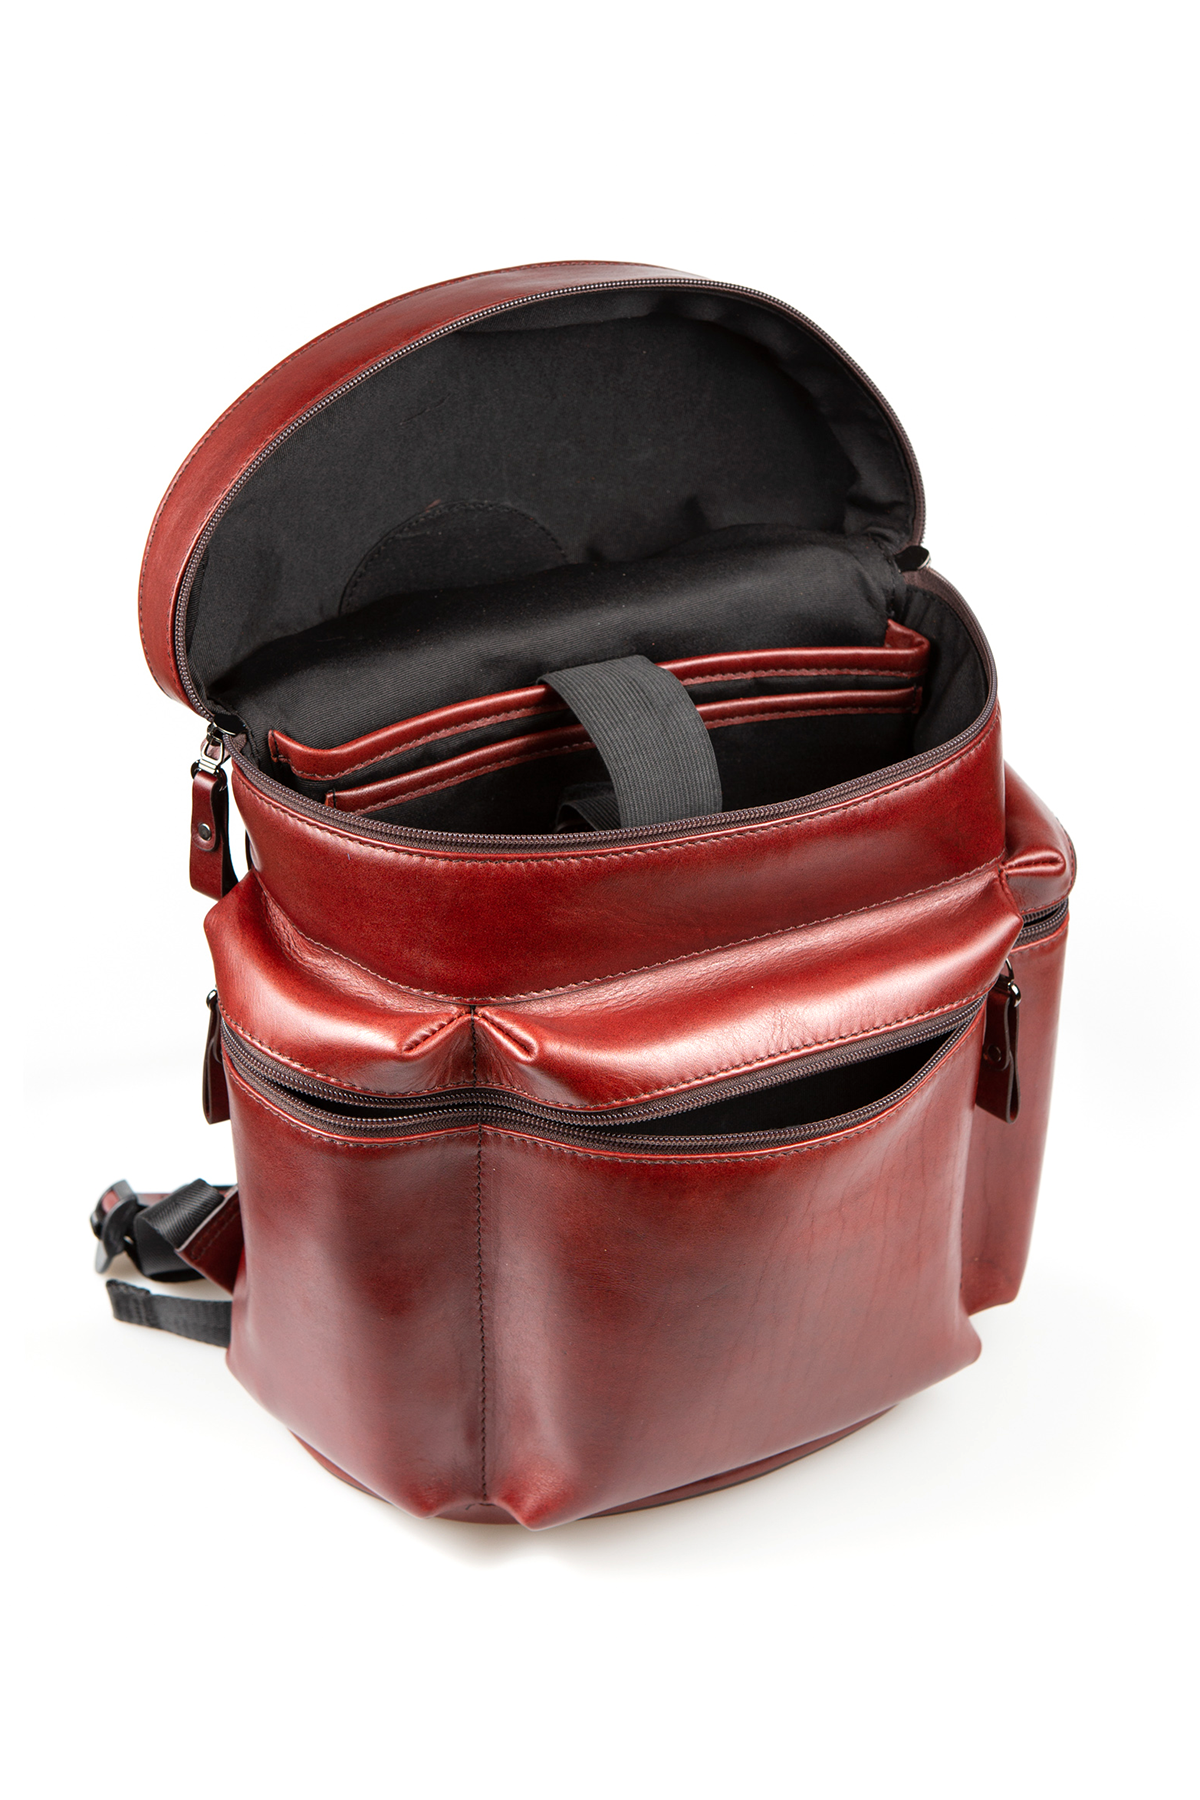 A genuine leather backpack with the top unzipped and open